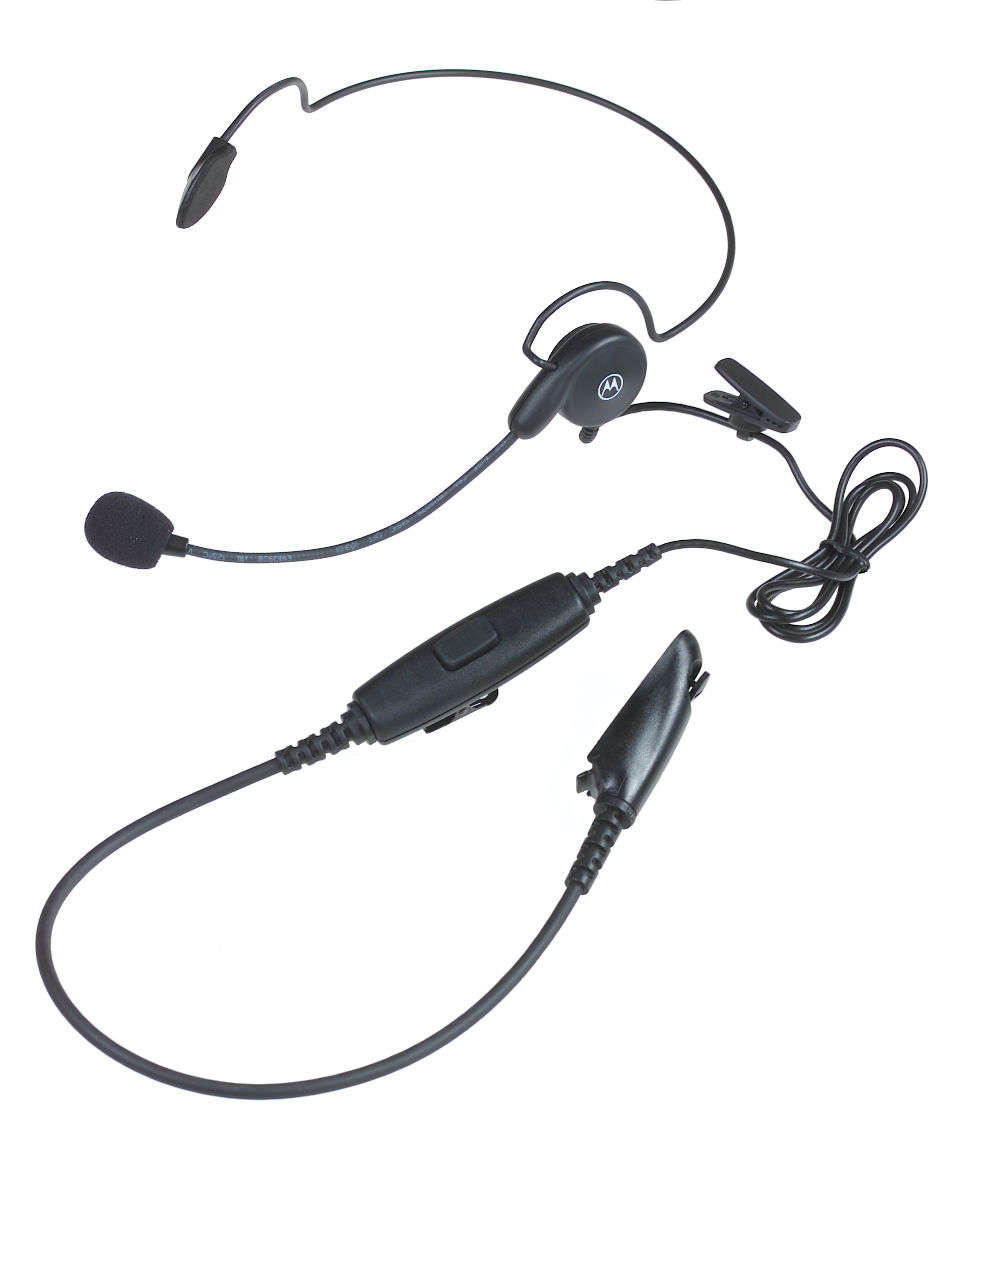 Motorola Wind Protected Headset with PTT Button ENMN4012A